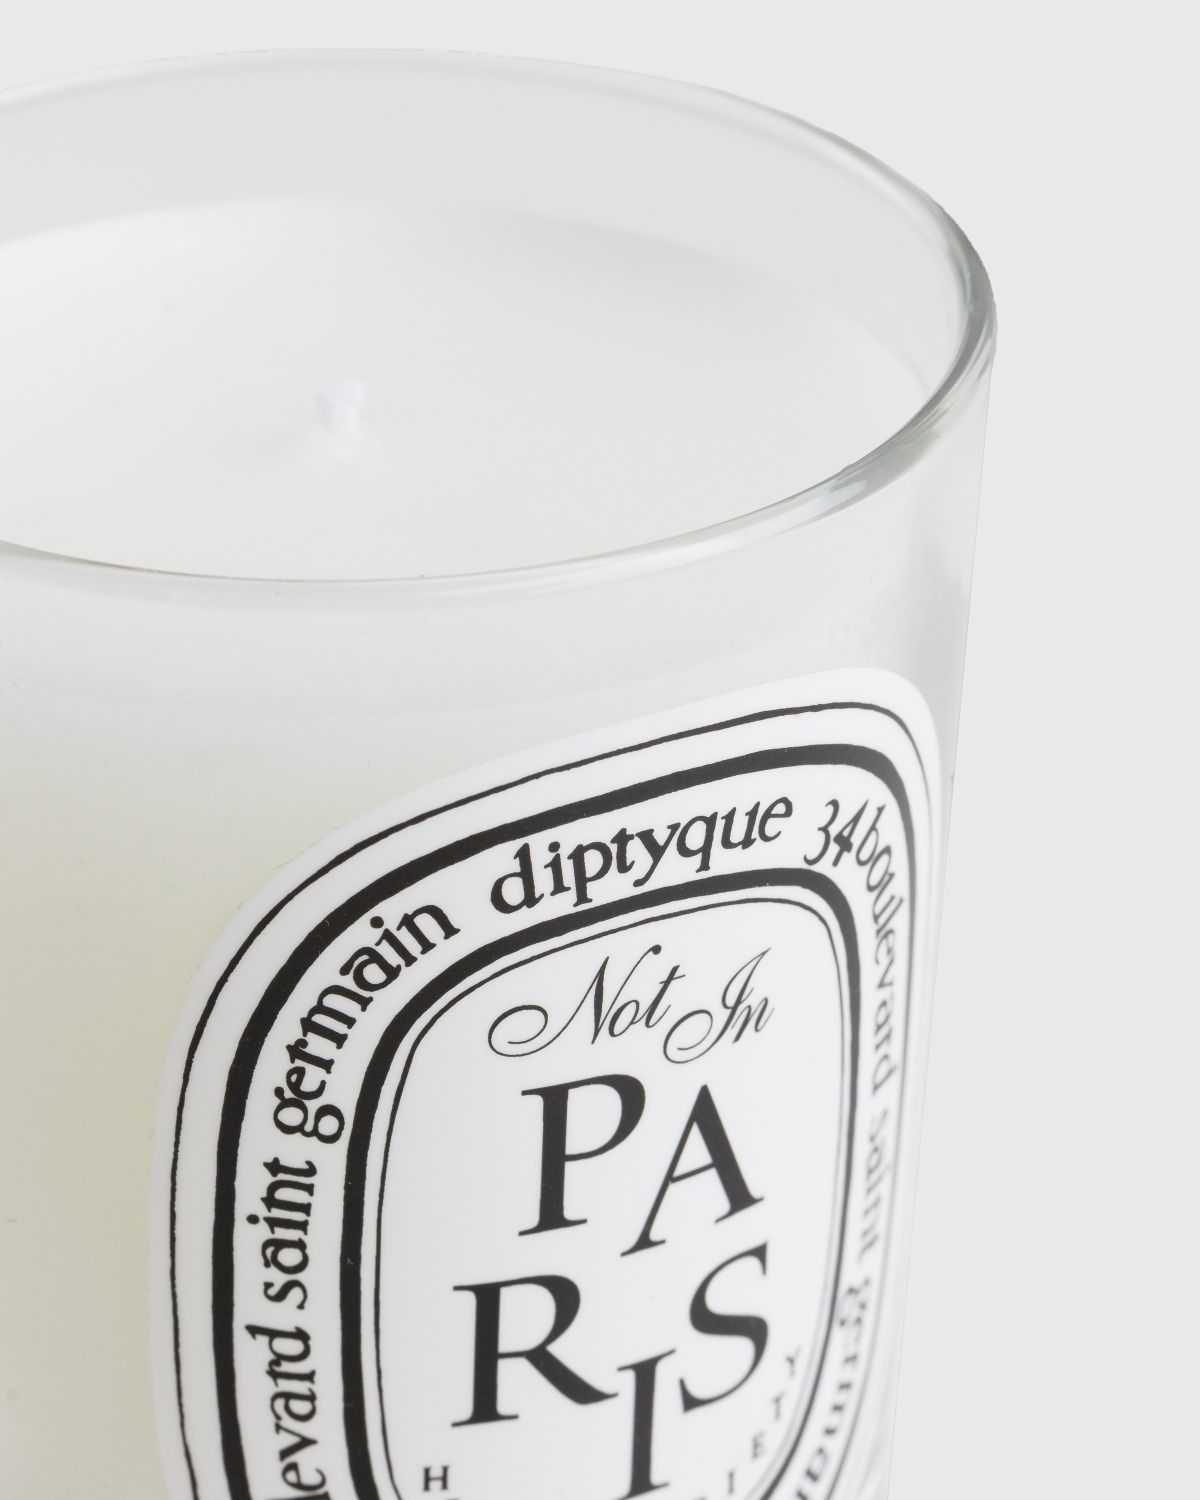 Diptyque x Highsnobiety – Not In Paris 4 Scented Candle White - Candles - White - Image 5